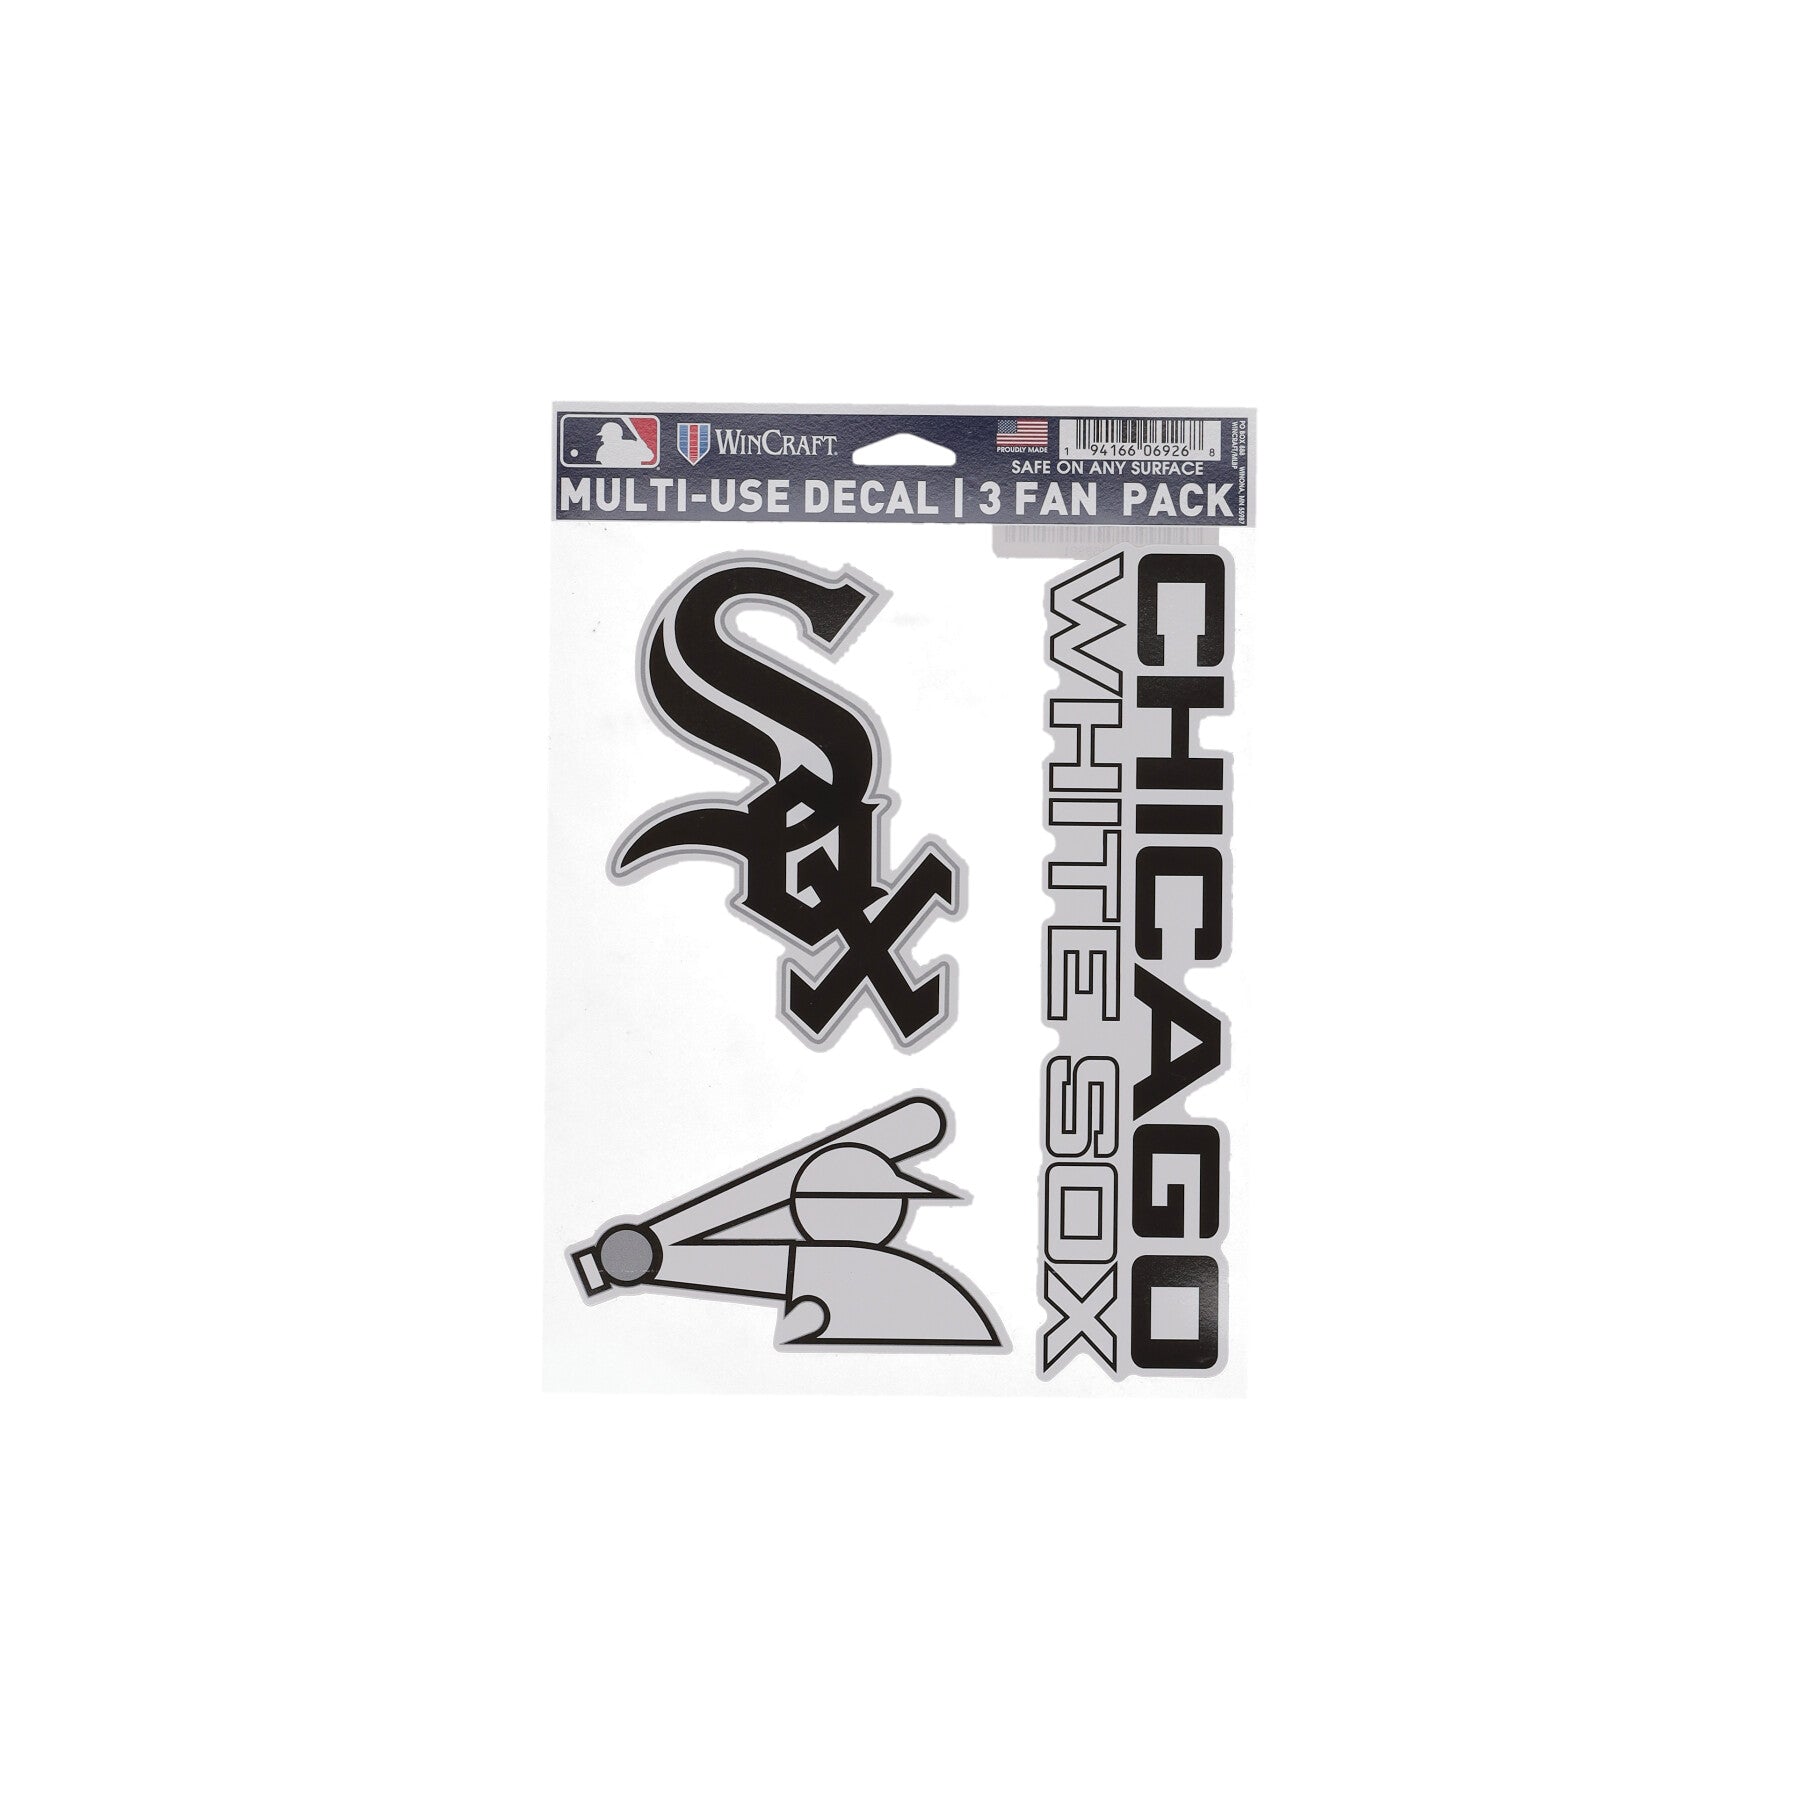 Wincraft, Decalcomania Unisex Mlb 5.5 X 7.75” Fan Pack Decals Chiwhi, Original Team Colors